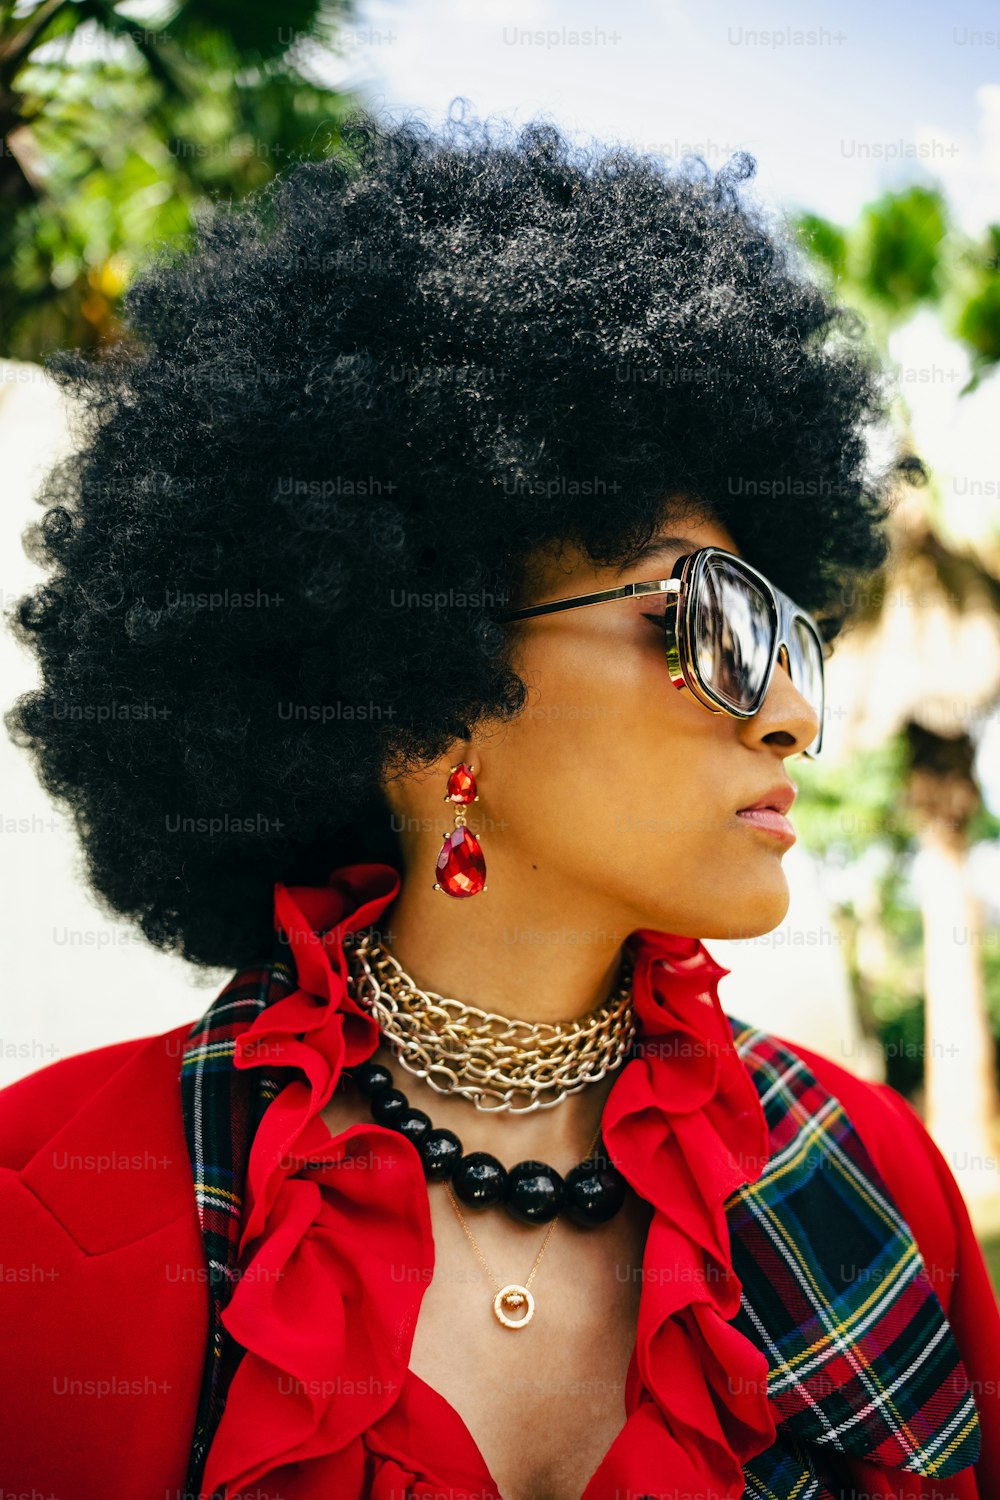 a woman with an afro wearing sunglasses and a red shirt